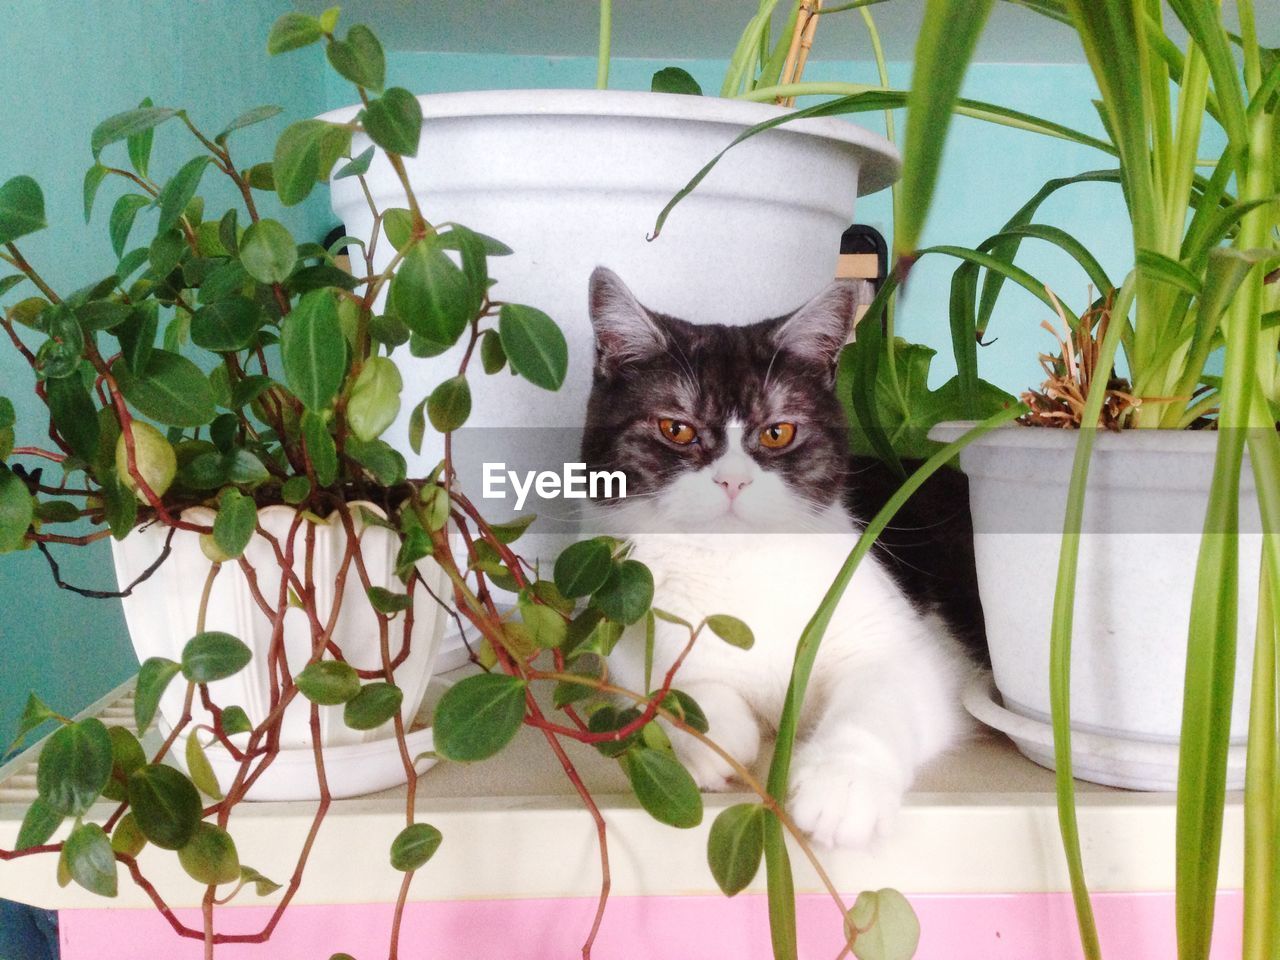 Portrait of cat sitting by potted plants in house